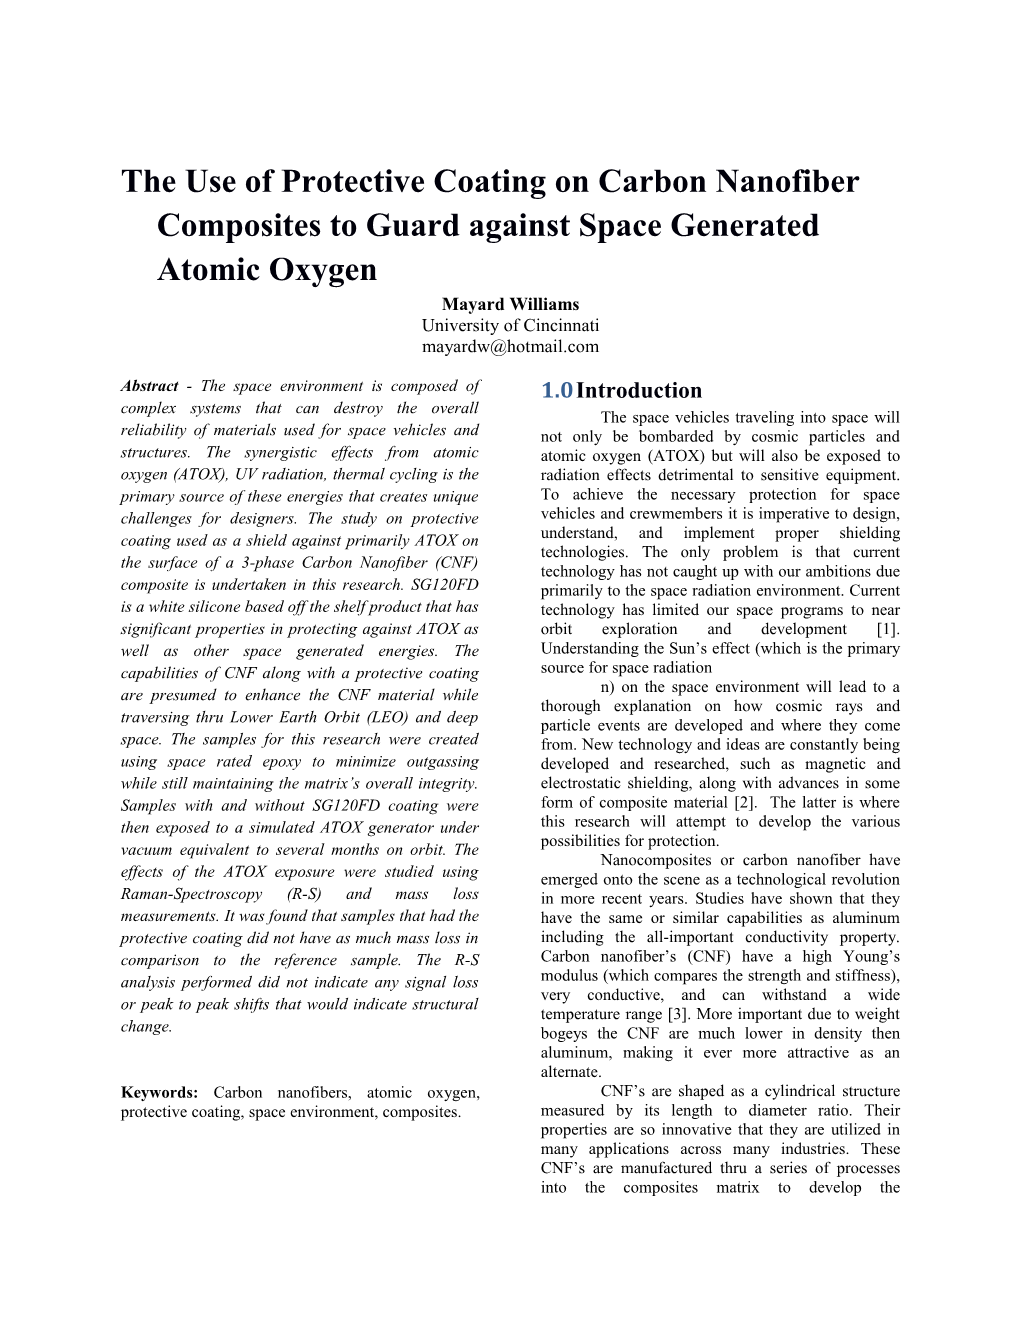 The Use of Protective Coating on Carbon Nanofiber Composites to Guard Against Space Generated